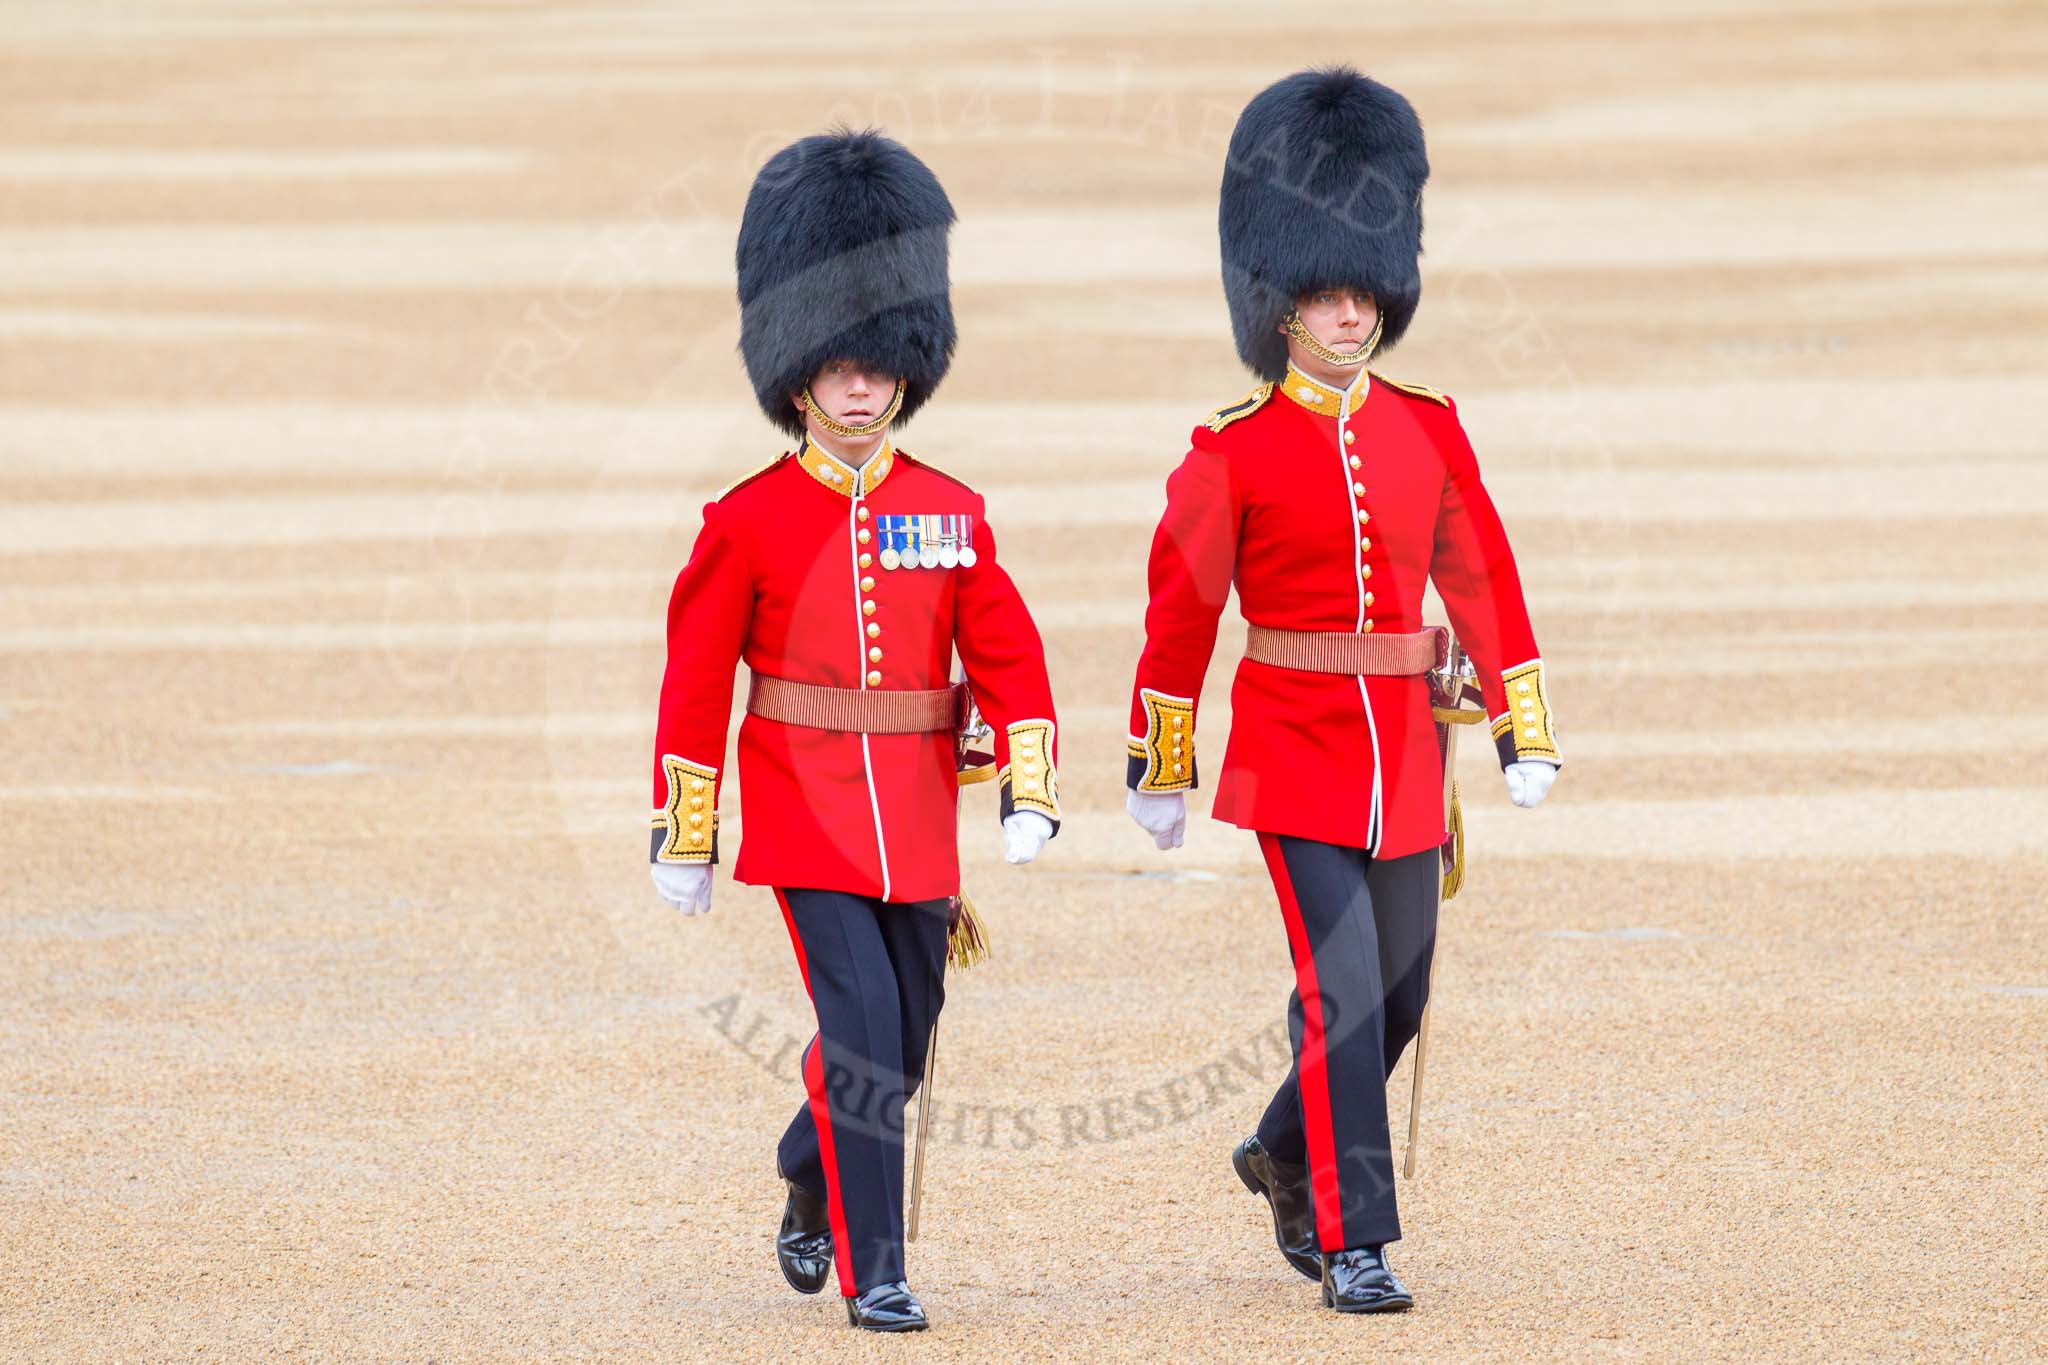 Trooping the Colour 2014.
Horse Guards Parade, Westminster,
London SW1A,

United Kingdom,
on 14 June 2014 at 09:46, image #50